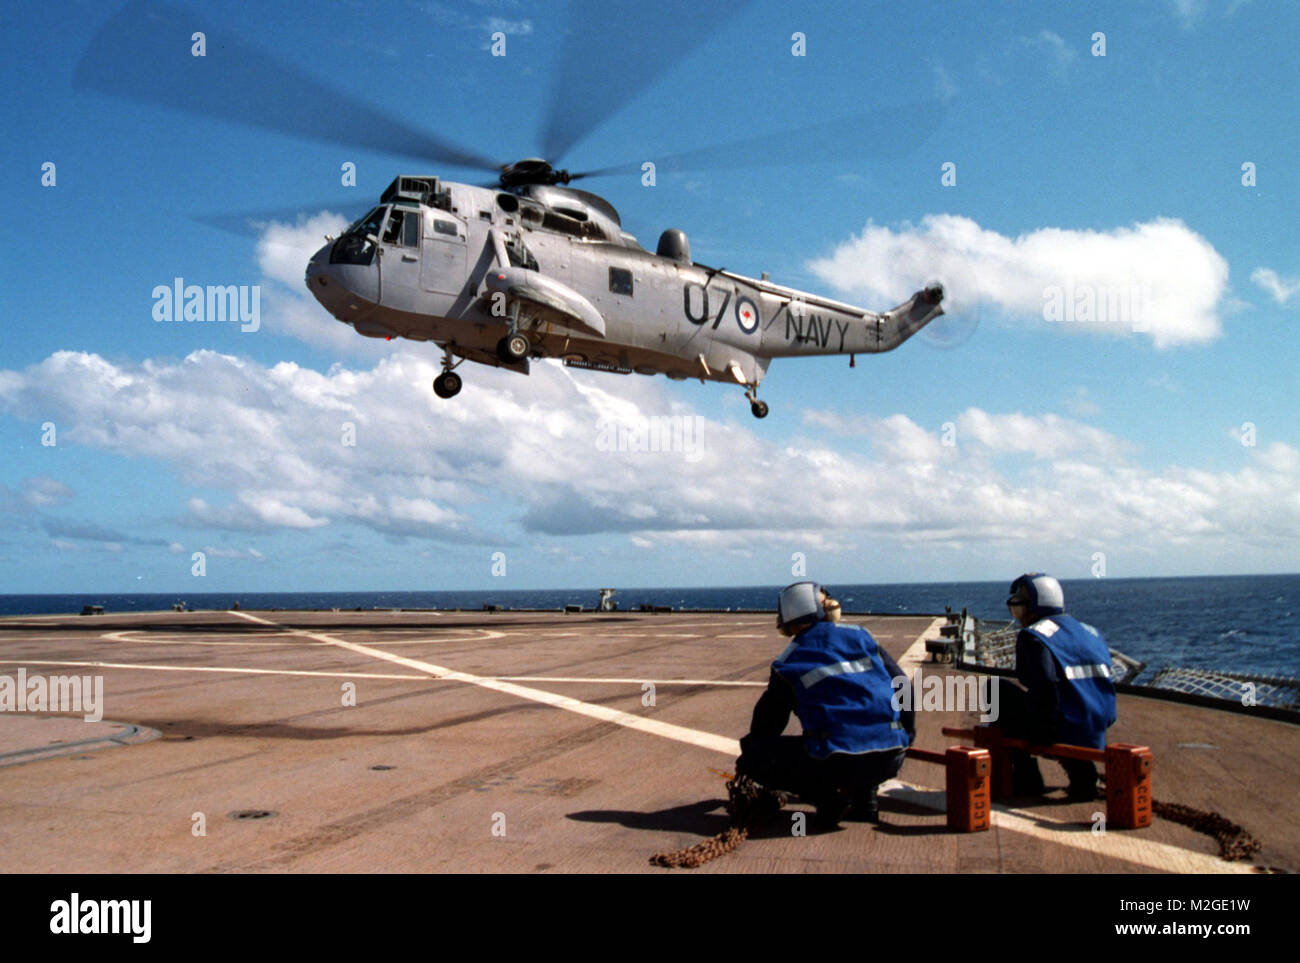 010520-N-2517J-001 Aboard USS Blue Ridge (May 20, 2001)-- An Australian SH-3 Helicopter lifts off the flight deck of USS Blue Ridge (LCC 19), after receiving supplies and fuel.   Blue Ridge is currently participating in exercise Tandem Thrust '01, a combined United States and Australian military training exercise.  This biannual exercise is being held in the vicinity of Shoalwater Bay training area, Queensland, Australia.  More than 27,000 military members are participating.  Canadian units are taking part as opposing forces.  Tandem Thrust is a training exercise for crisis action planning and Stock Photo